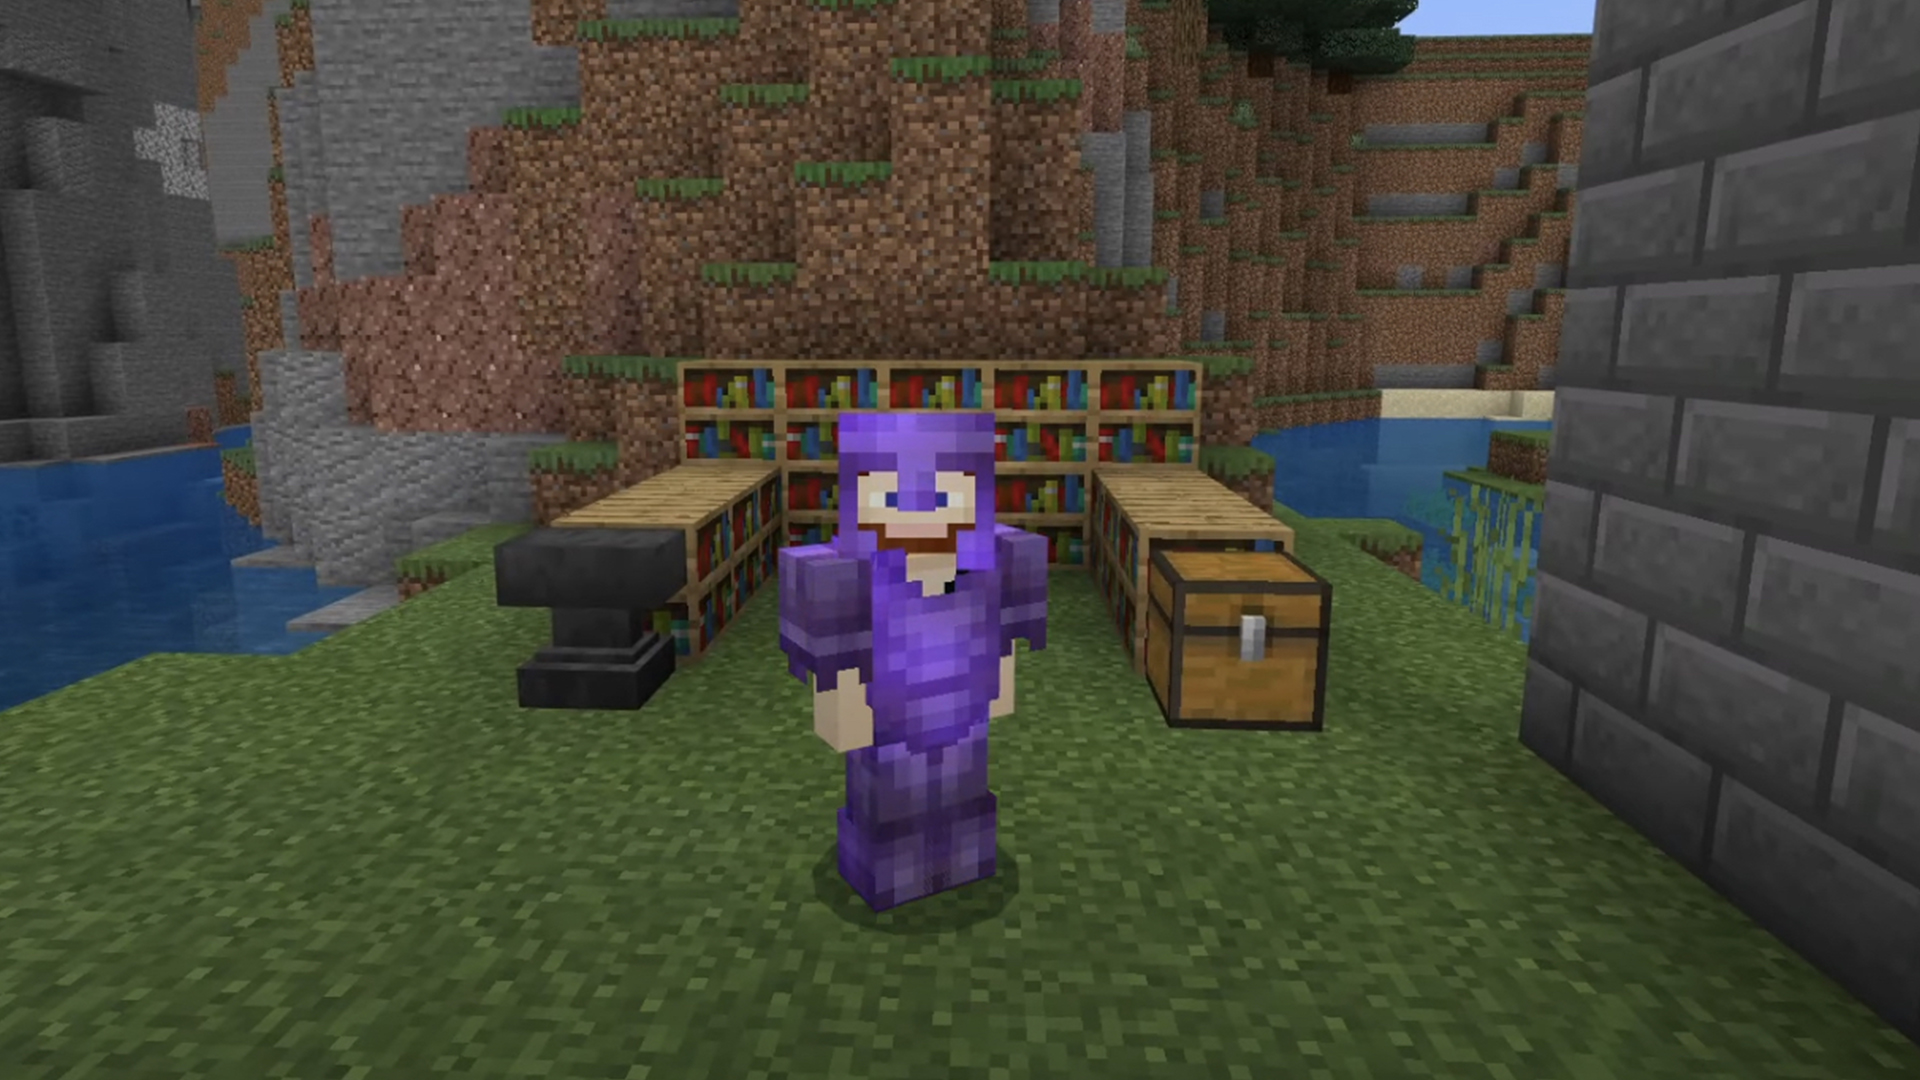 A Minecraft character covered in armour